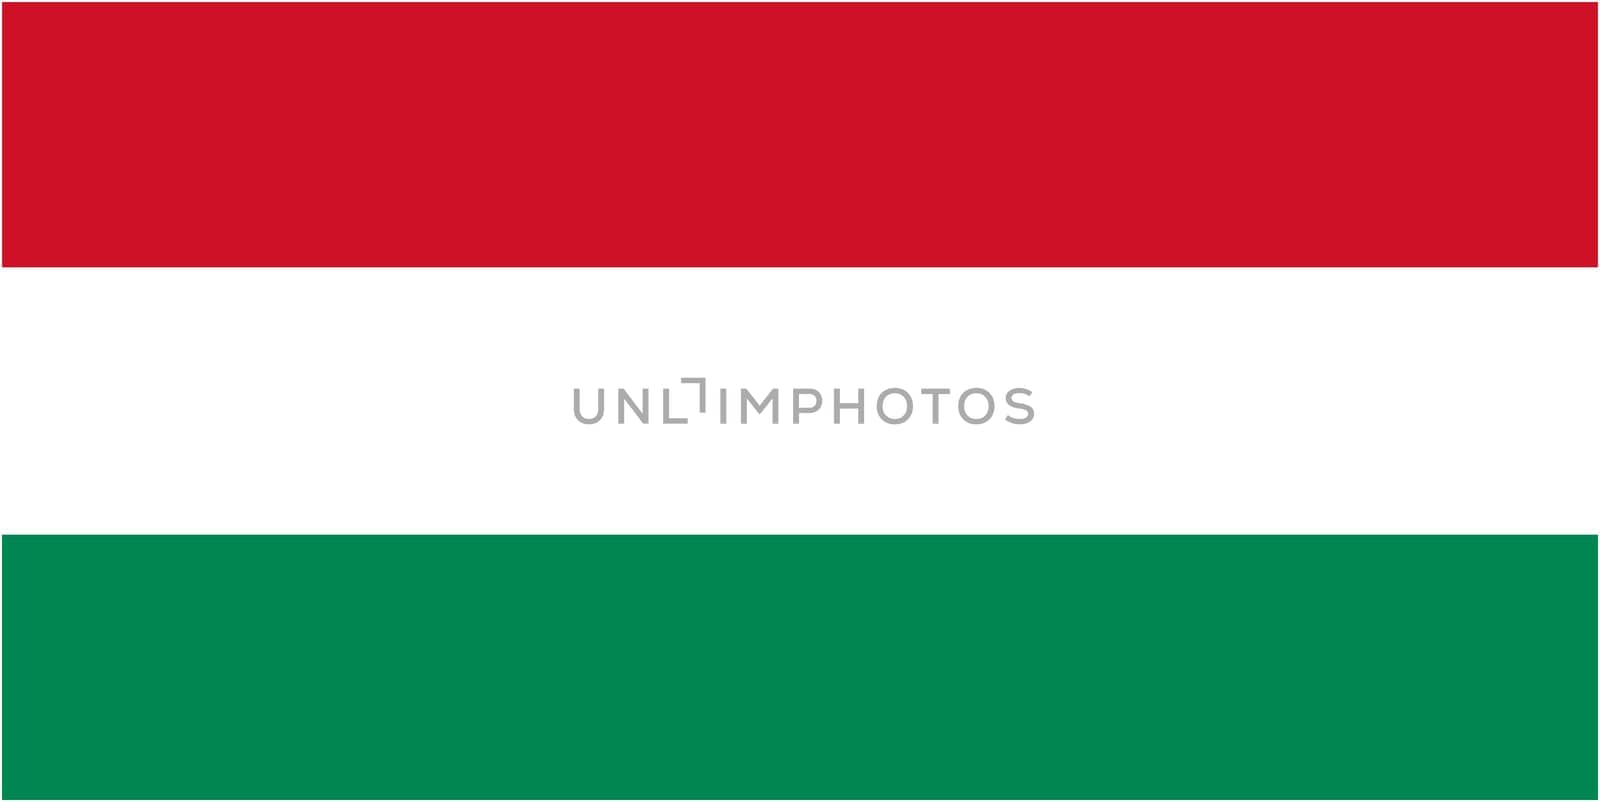 Hungary flag and language icon - isolated vector illustration